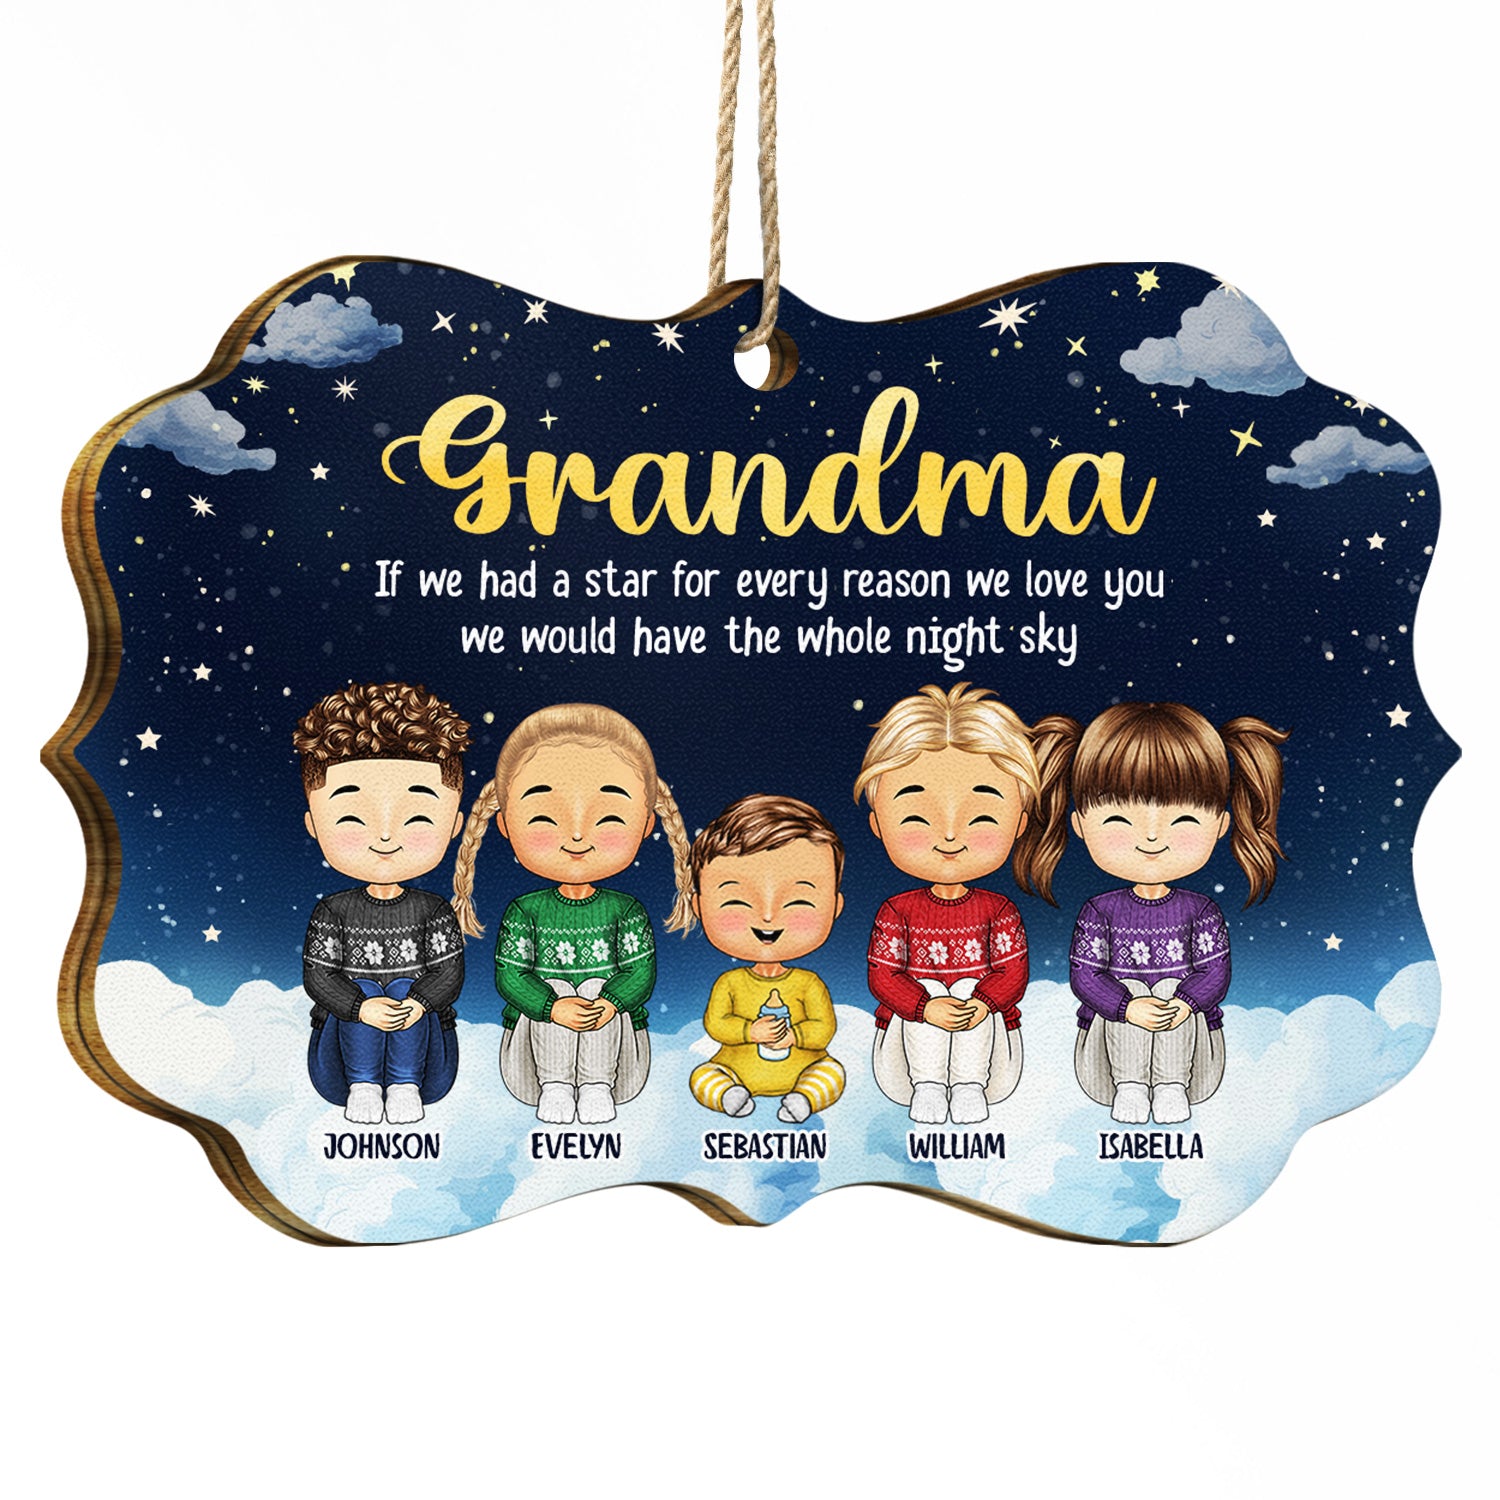 Every Reason We Love You - Christmas Gift For Grandparents, Parents - Personalized Medallion Wooden Ornament